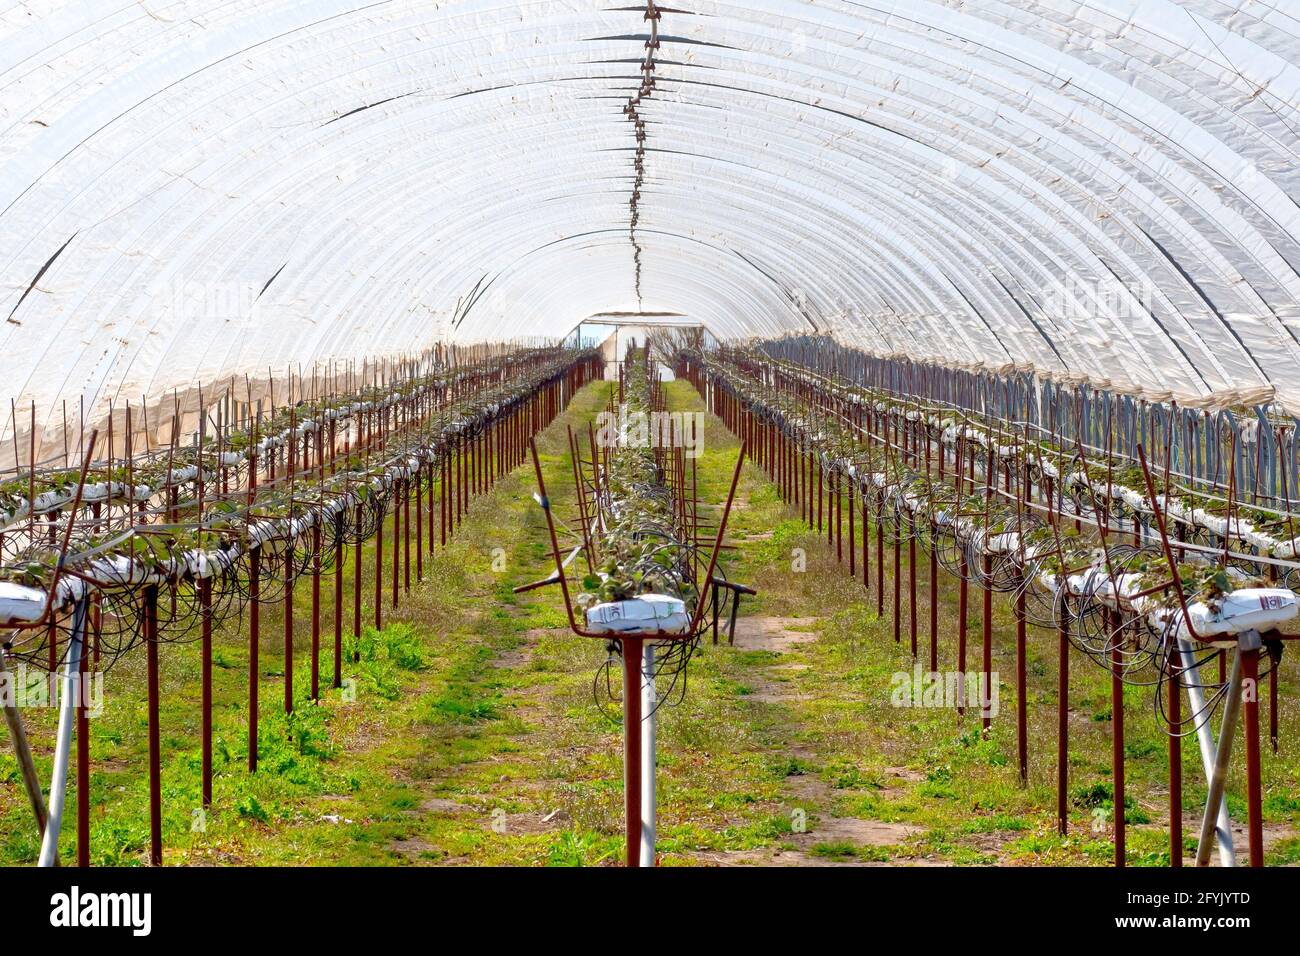 Interior shot of one of many polytunnels or greenhouses set up for the production of soft fruit on a farm in Angus, Tayside, Scotland. Stock Photo